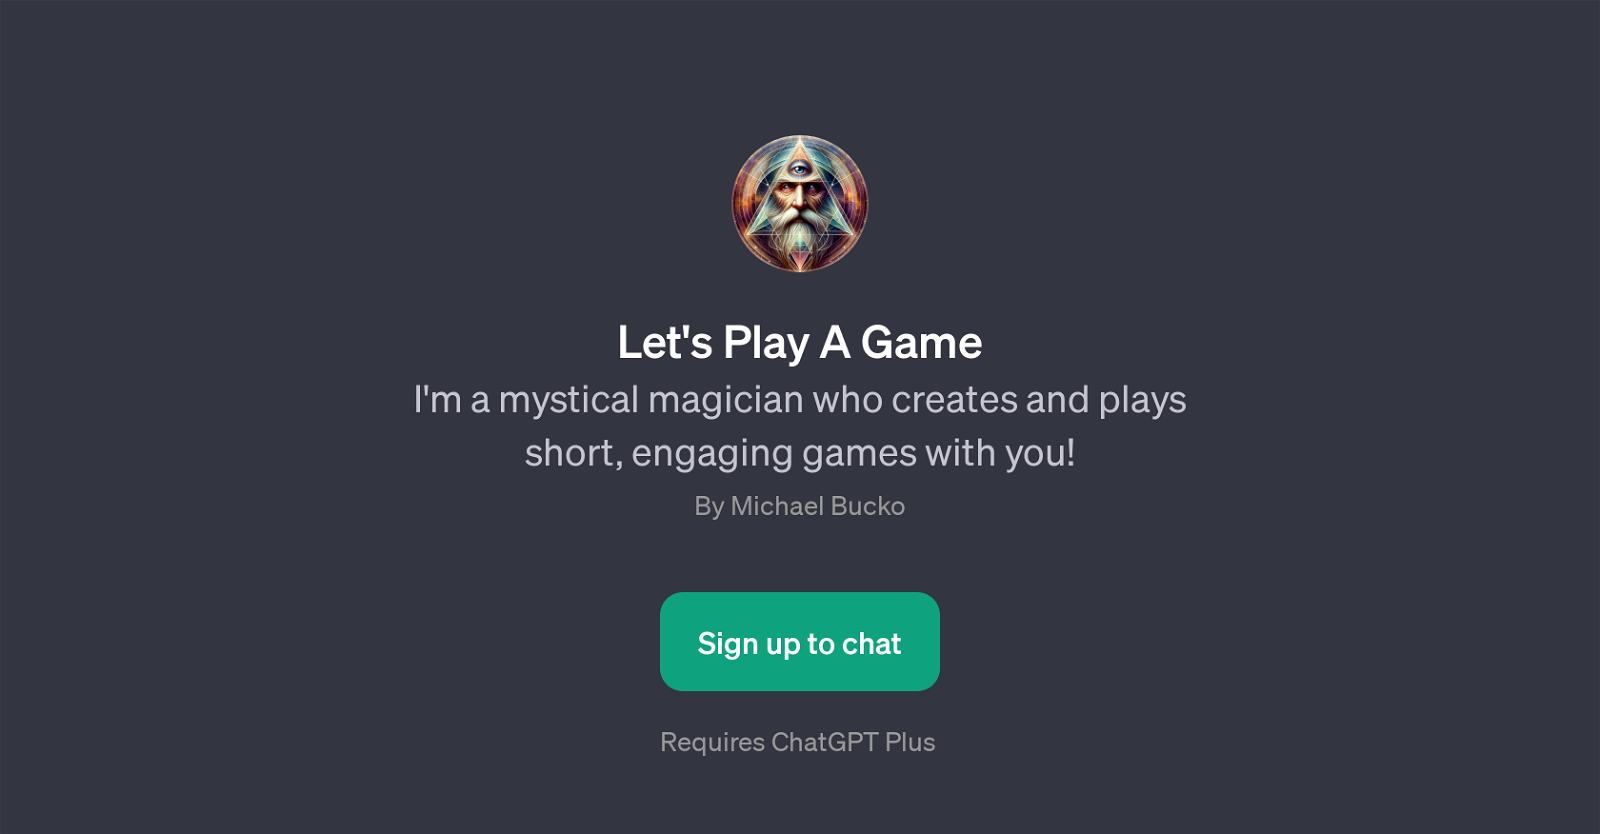 Let's Play A Game website